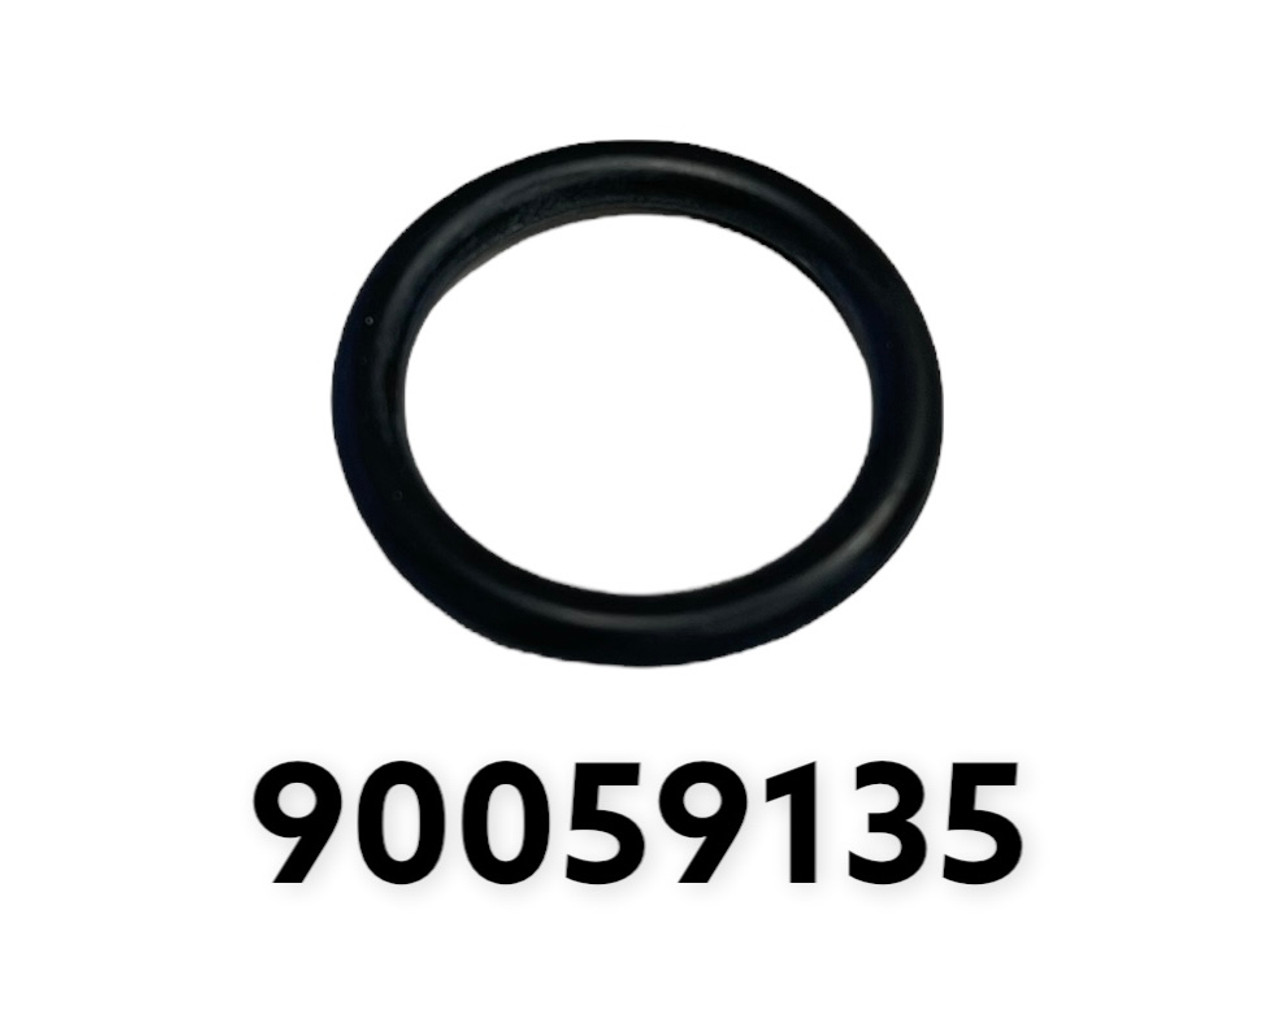 F.Dick Brine Injector - Replacement Packing Ring #4 - 90059135